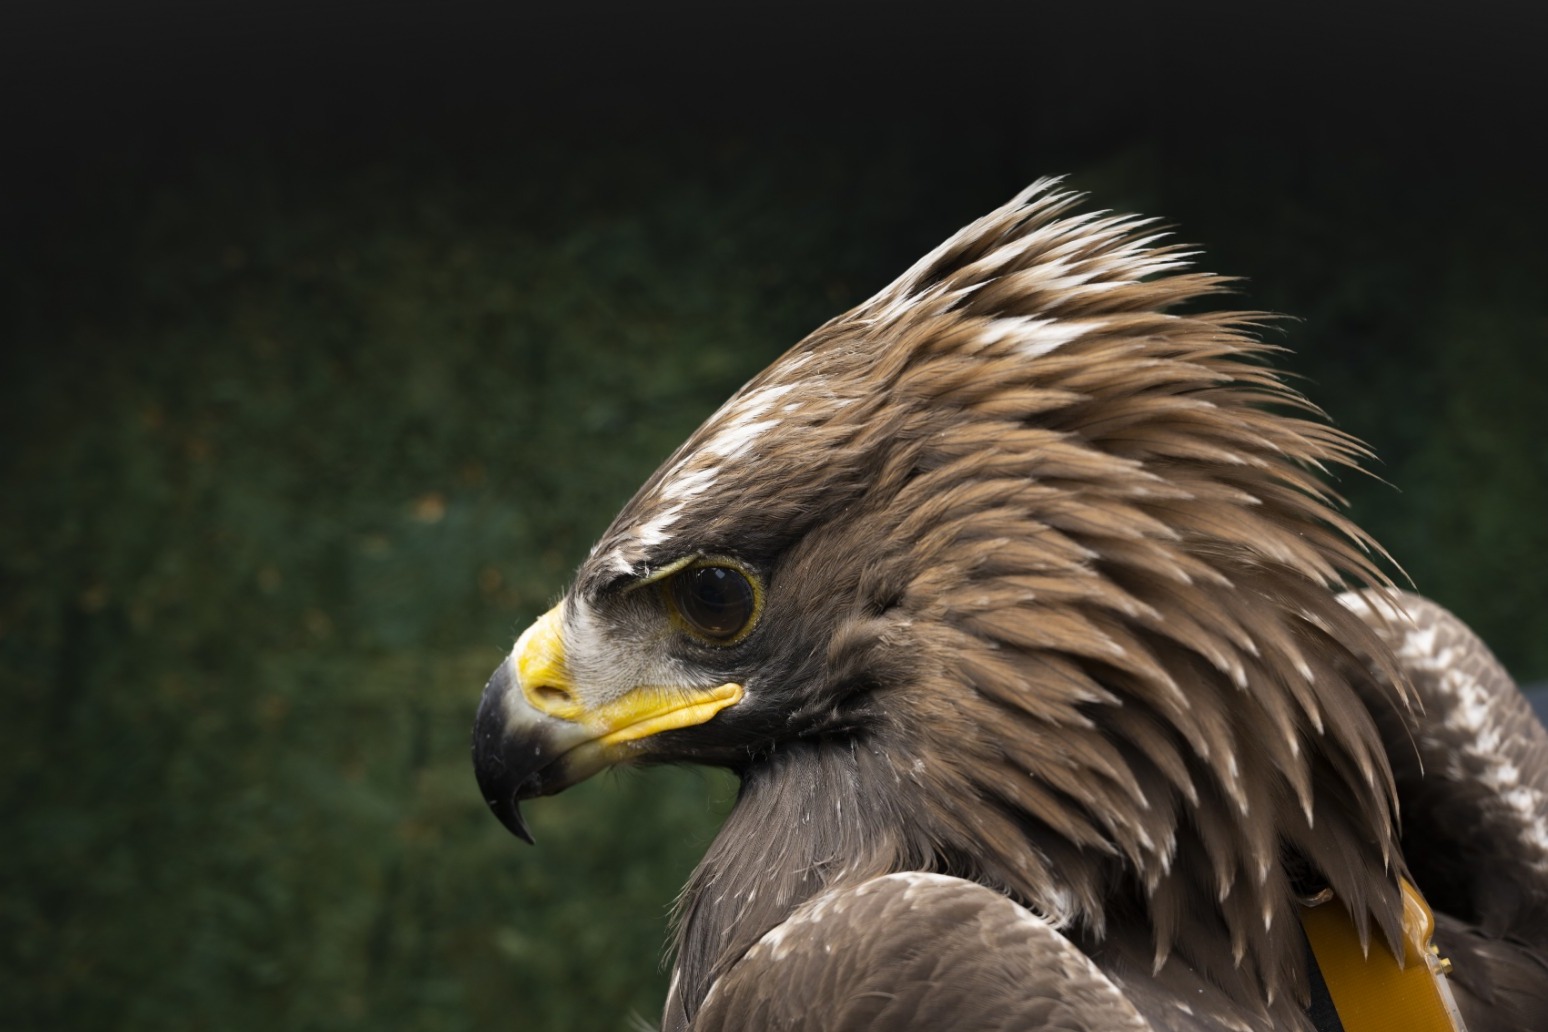 Golden eagle numbers soar to new heights in conservation project 